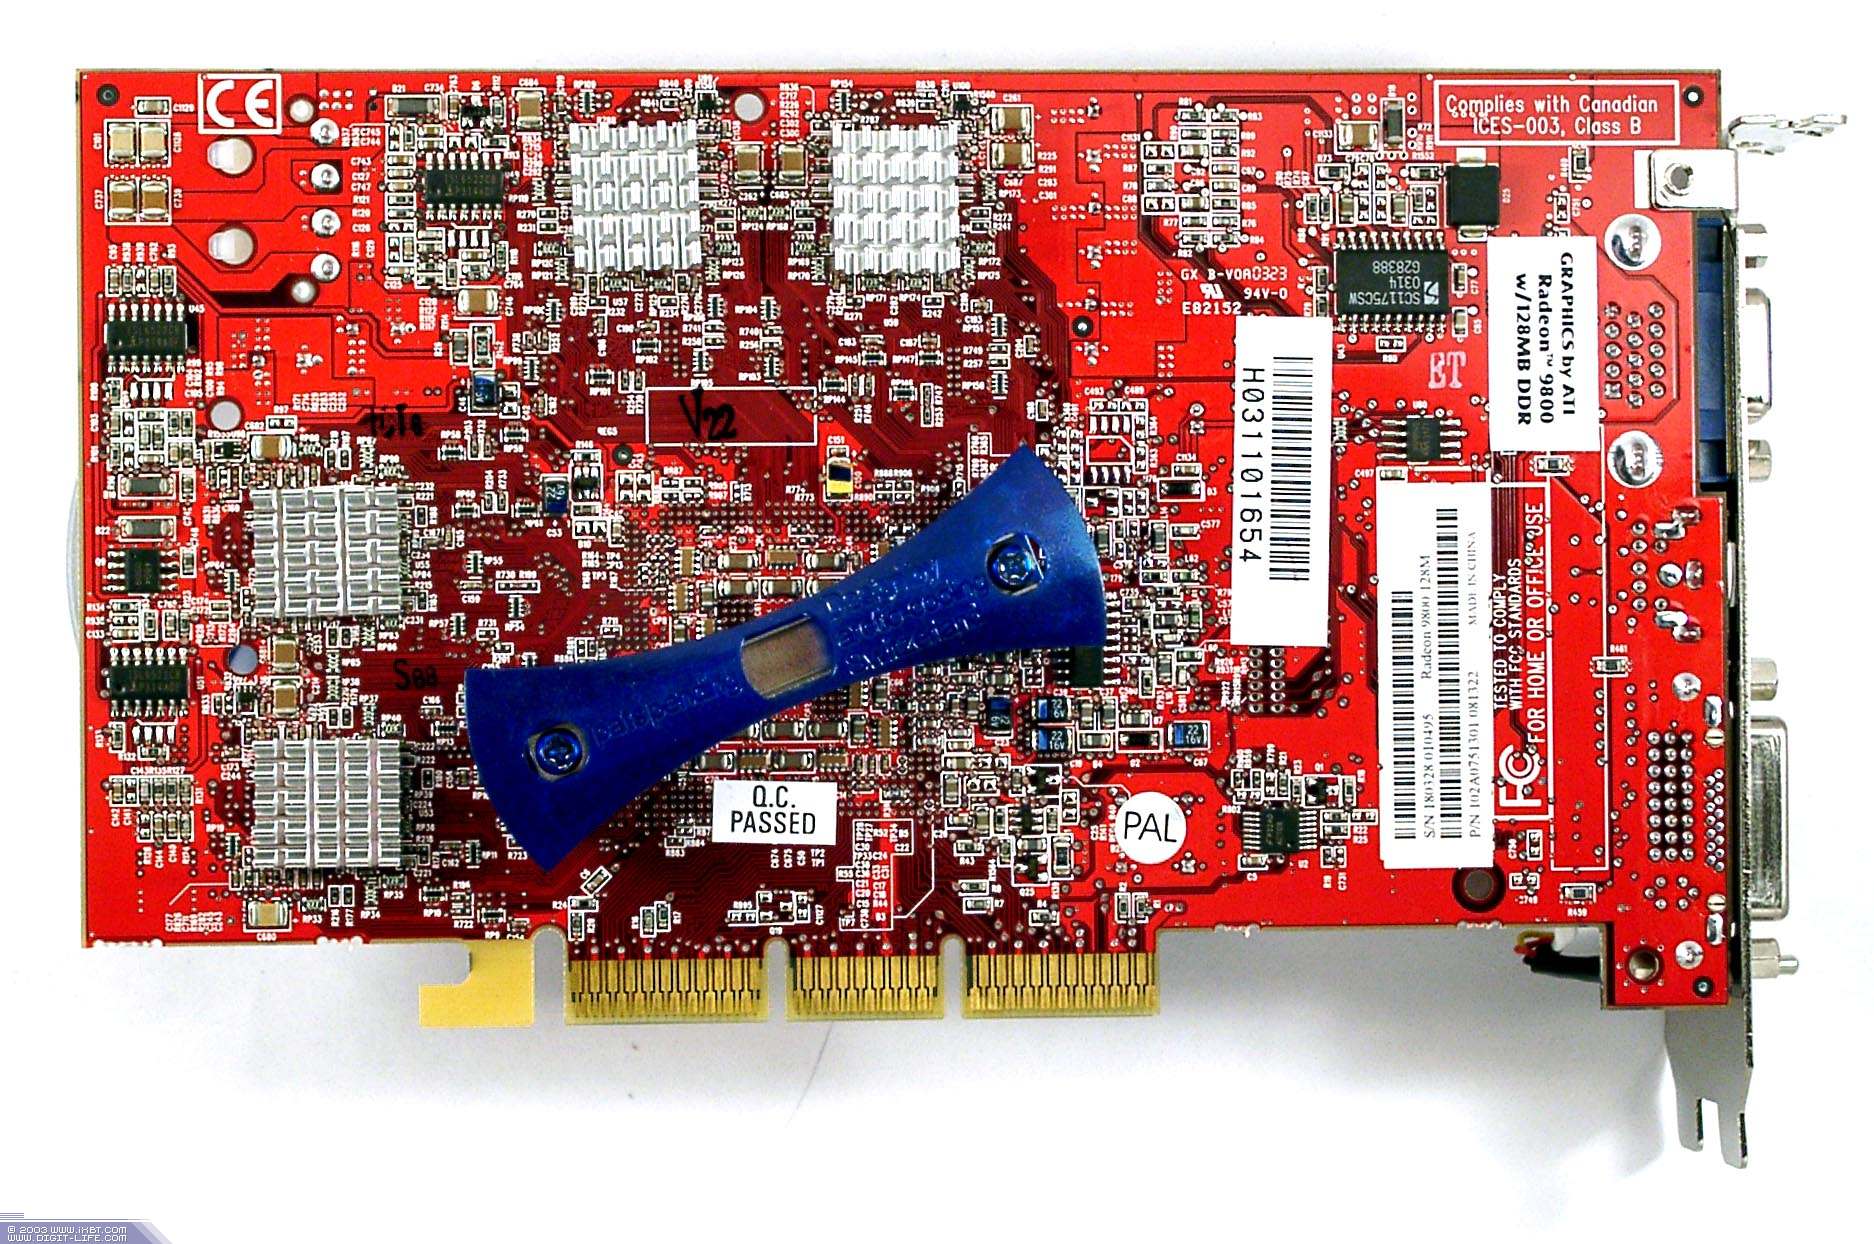 http://www.ixbt.com/video2/images/his-1/his-9800iceq-scan-back.jpg